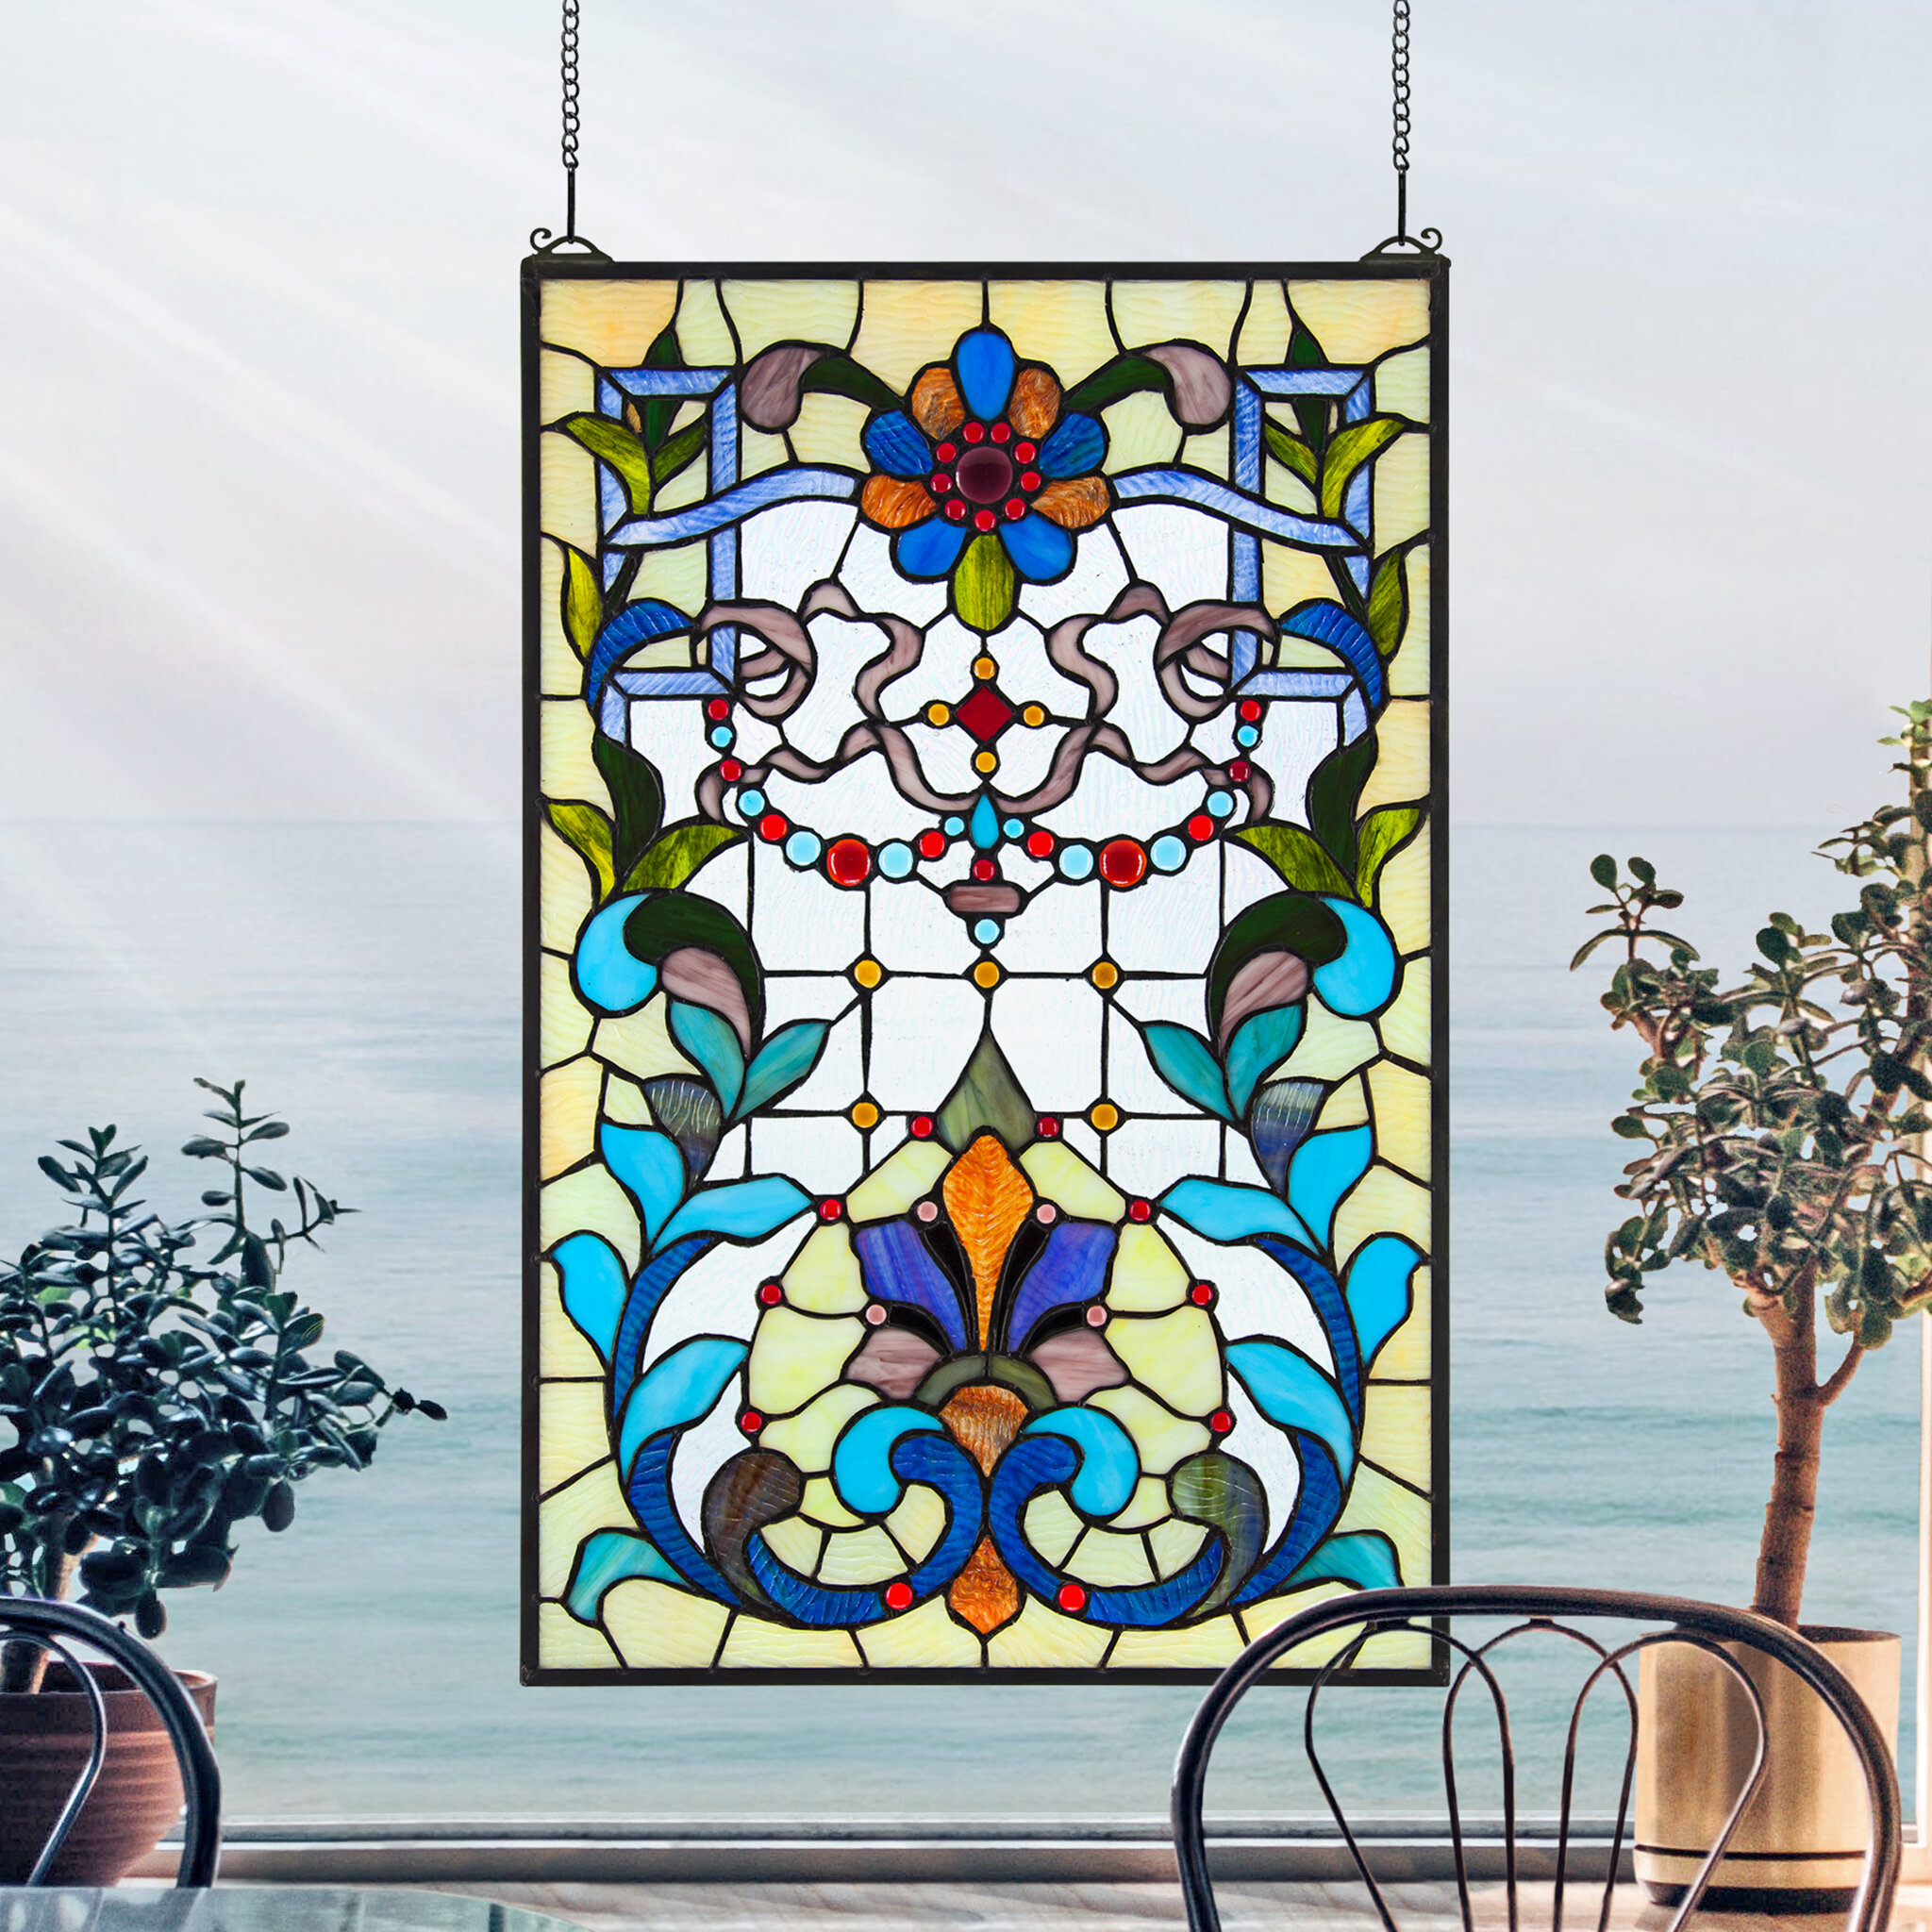 Peacock Sunset Stained Glass Window - Design Toscano